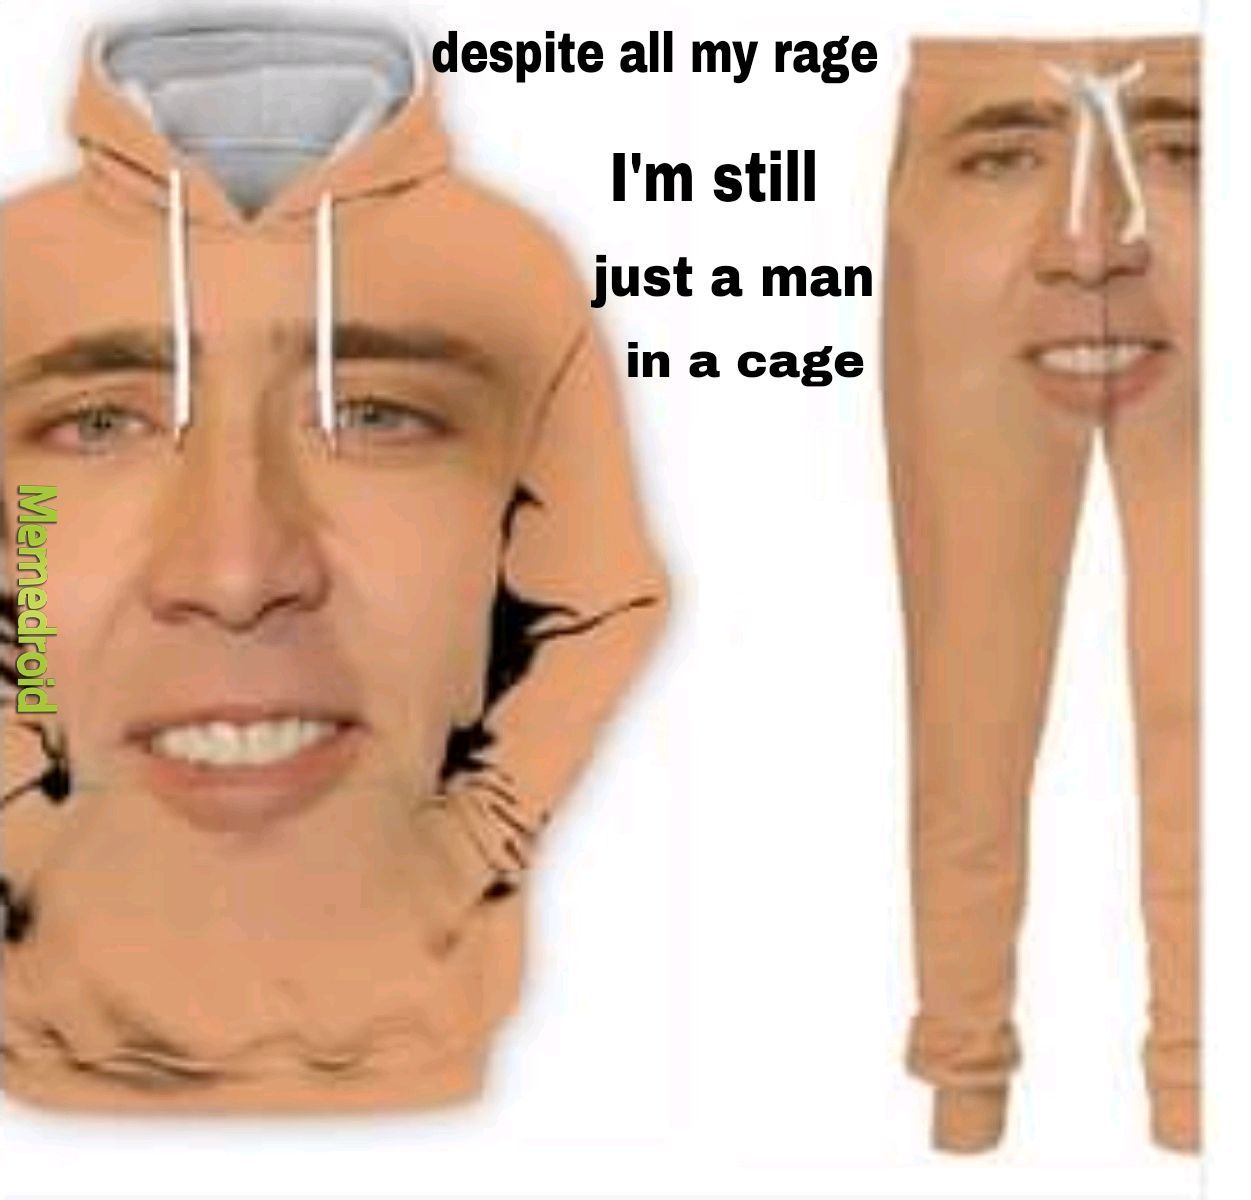 Man in a cage - meme